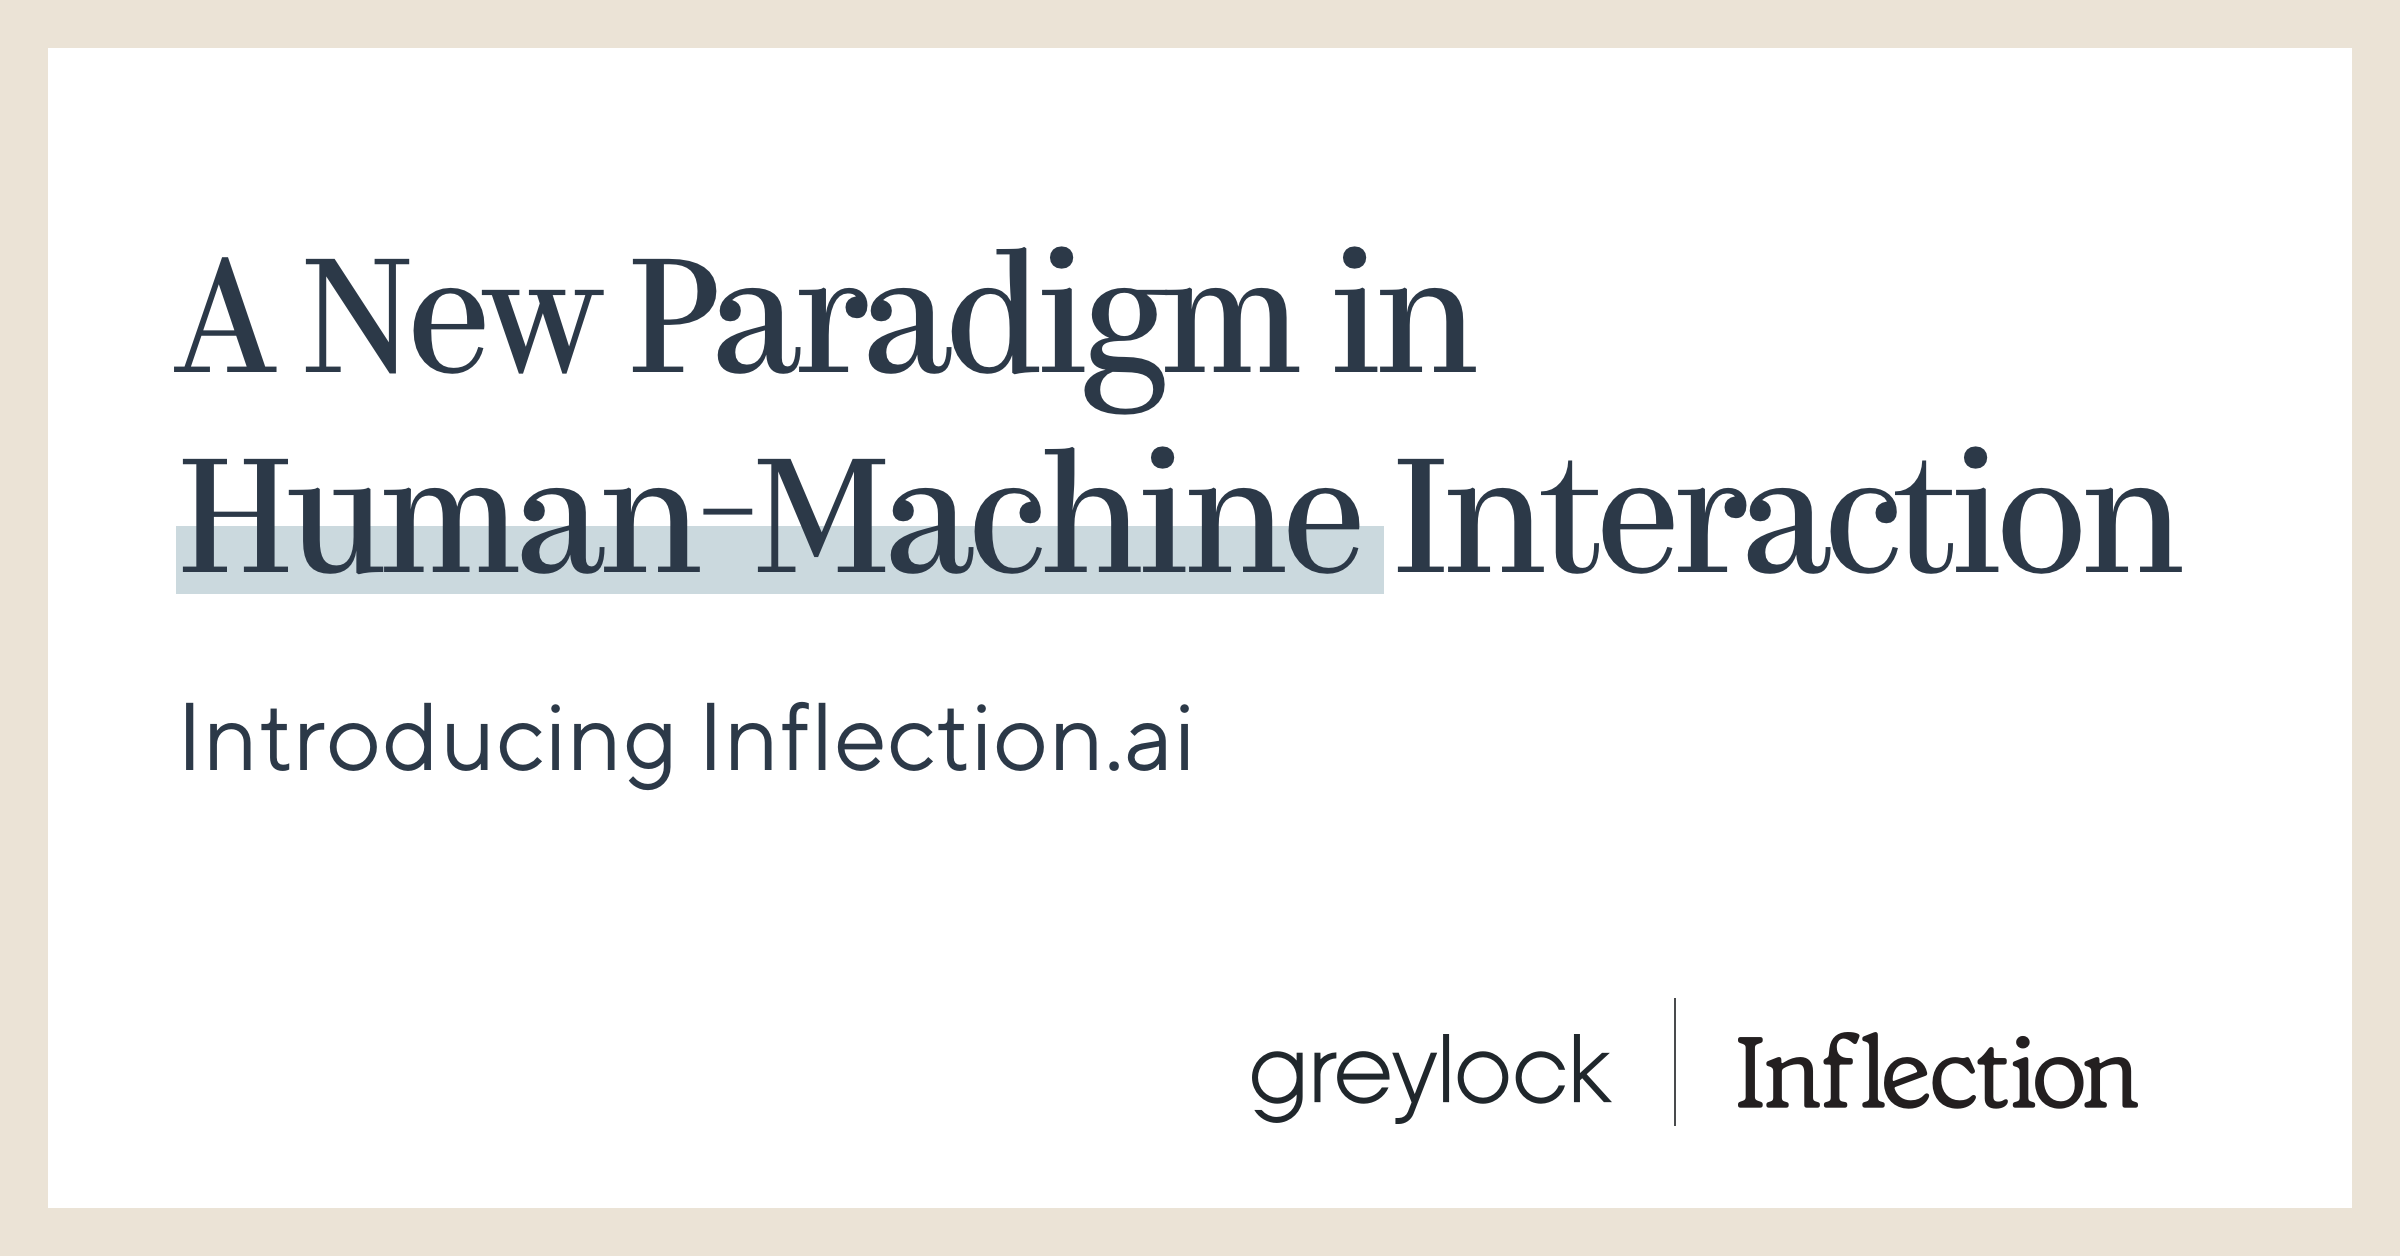 A New Paradigm in Human-Machine Interaction